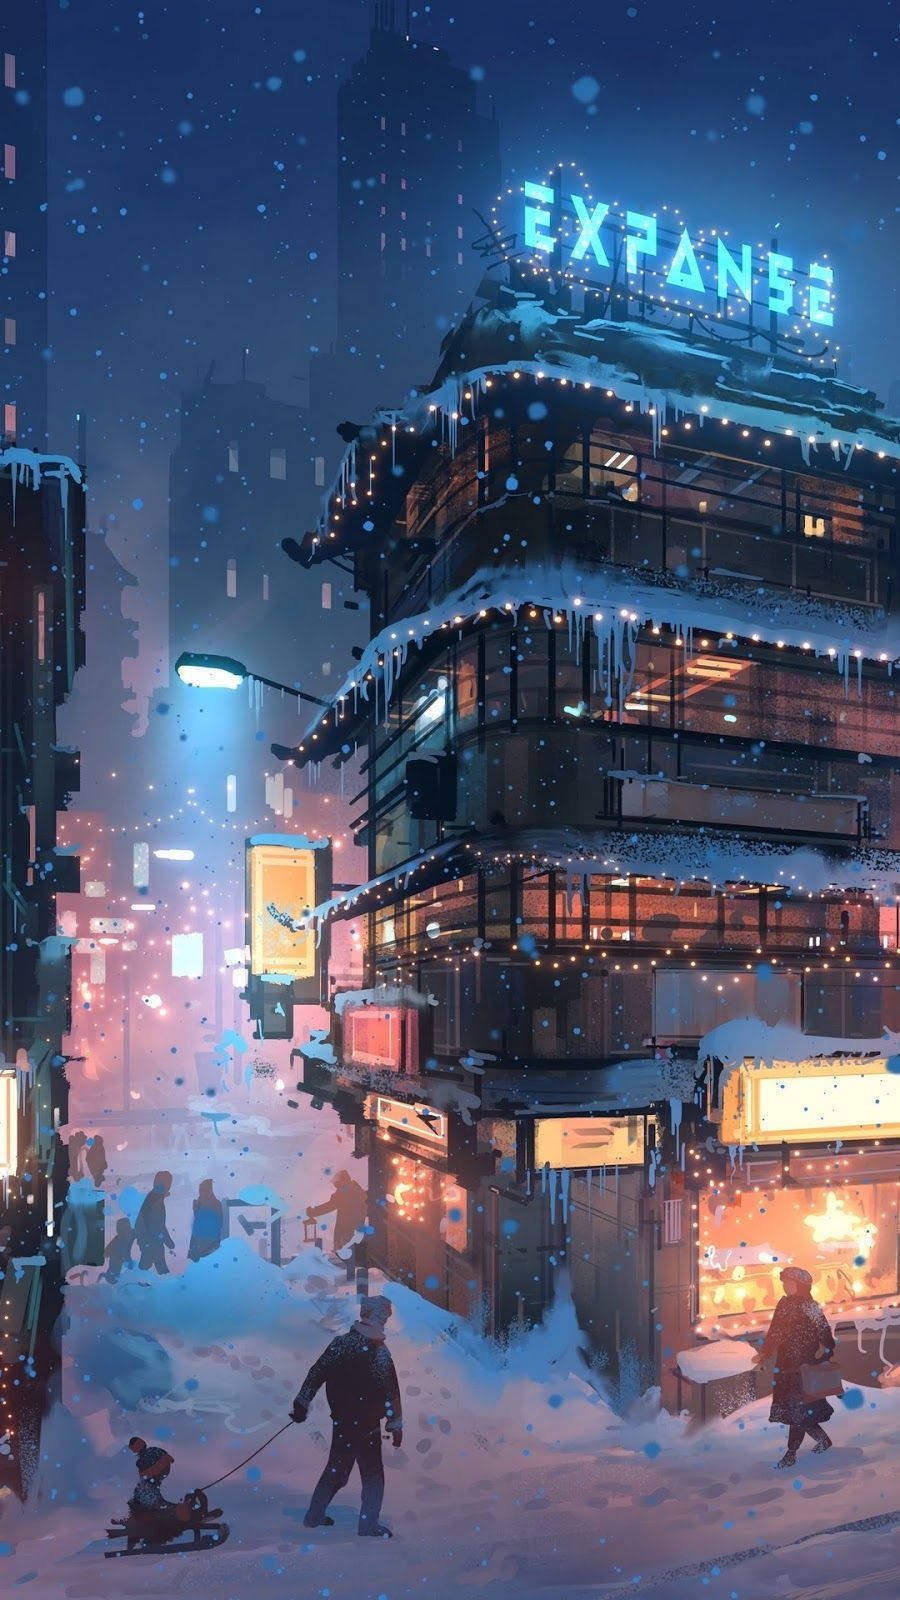 Aesthetic Anime Expanse Building In Winter Phone